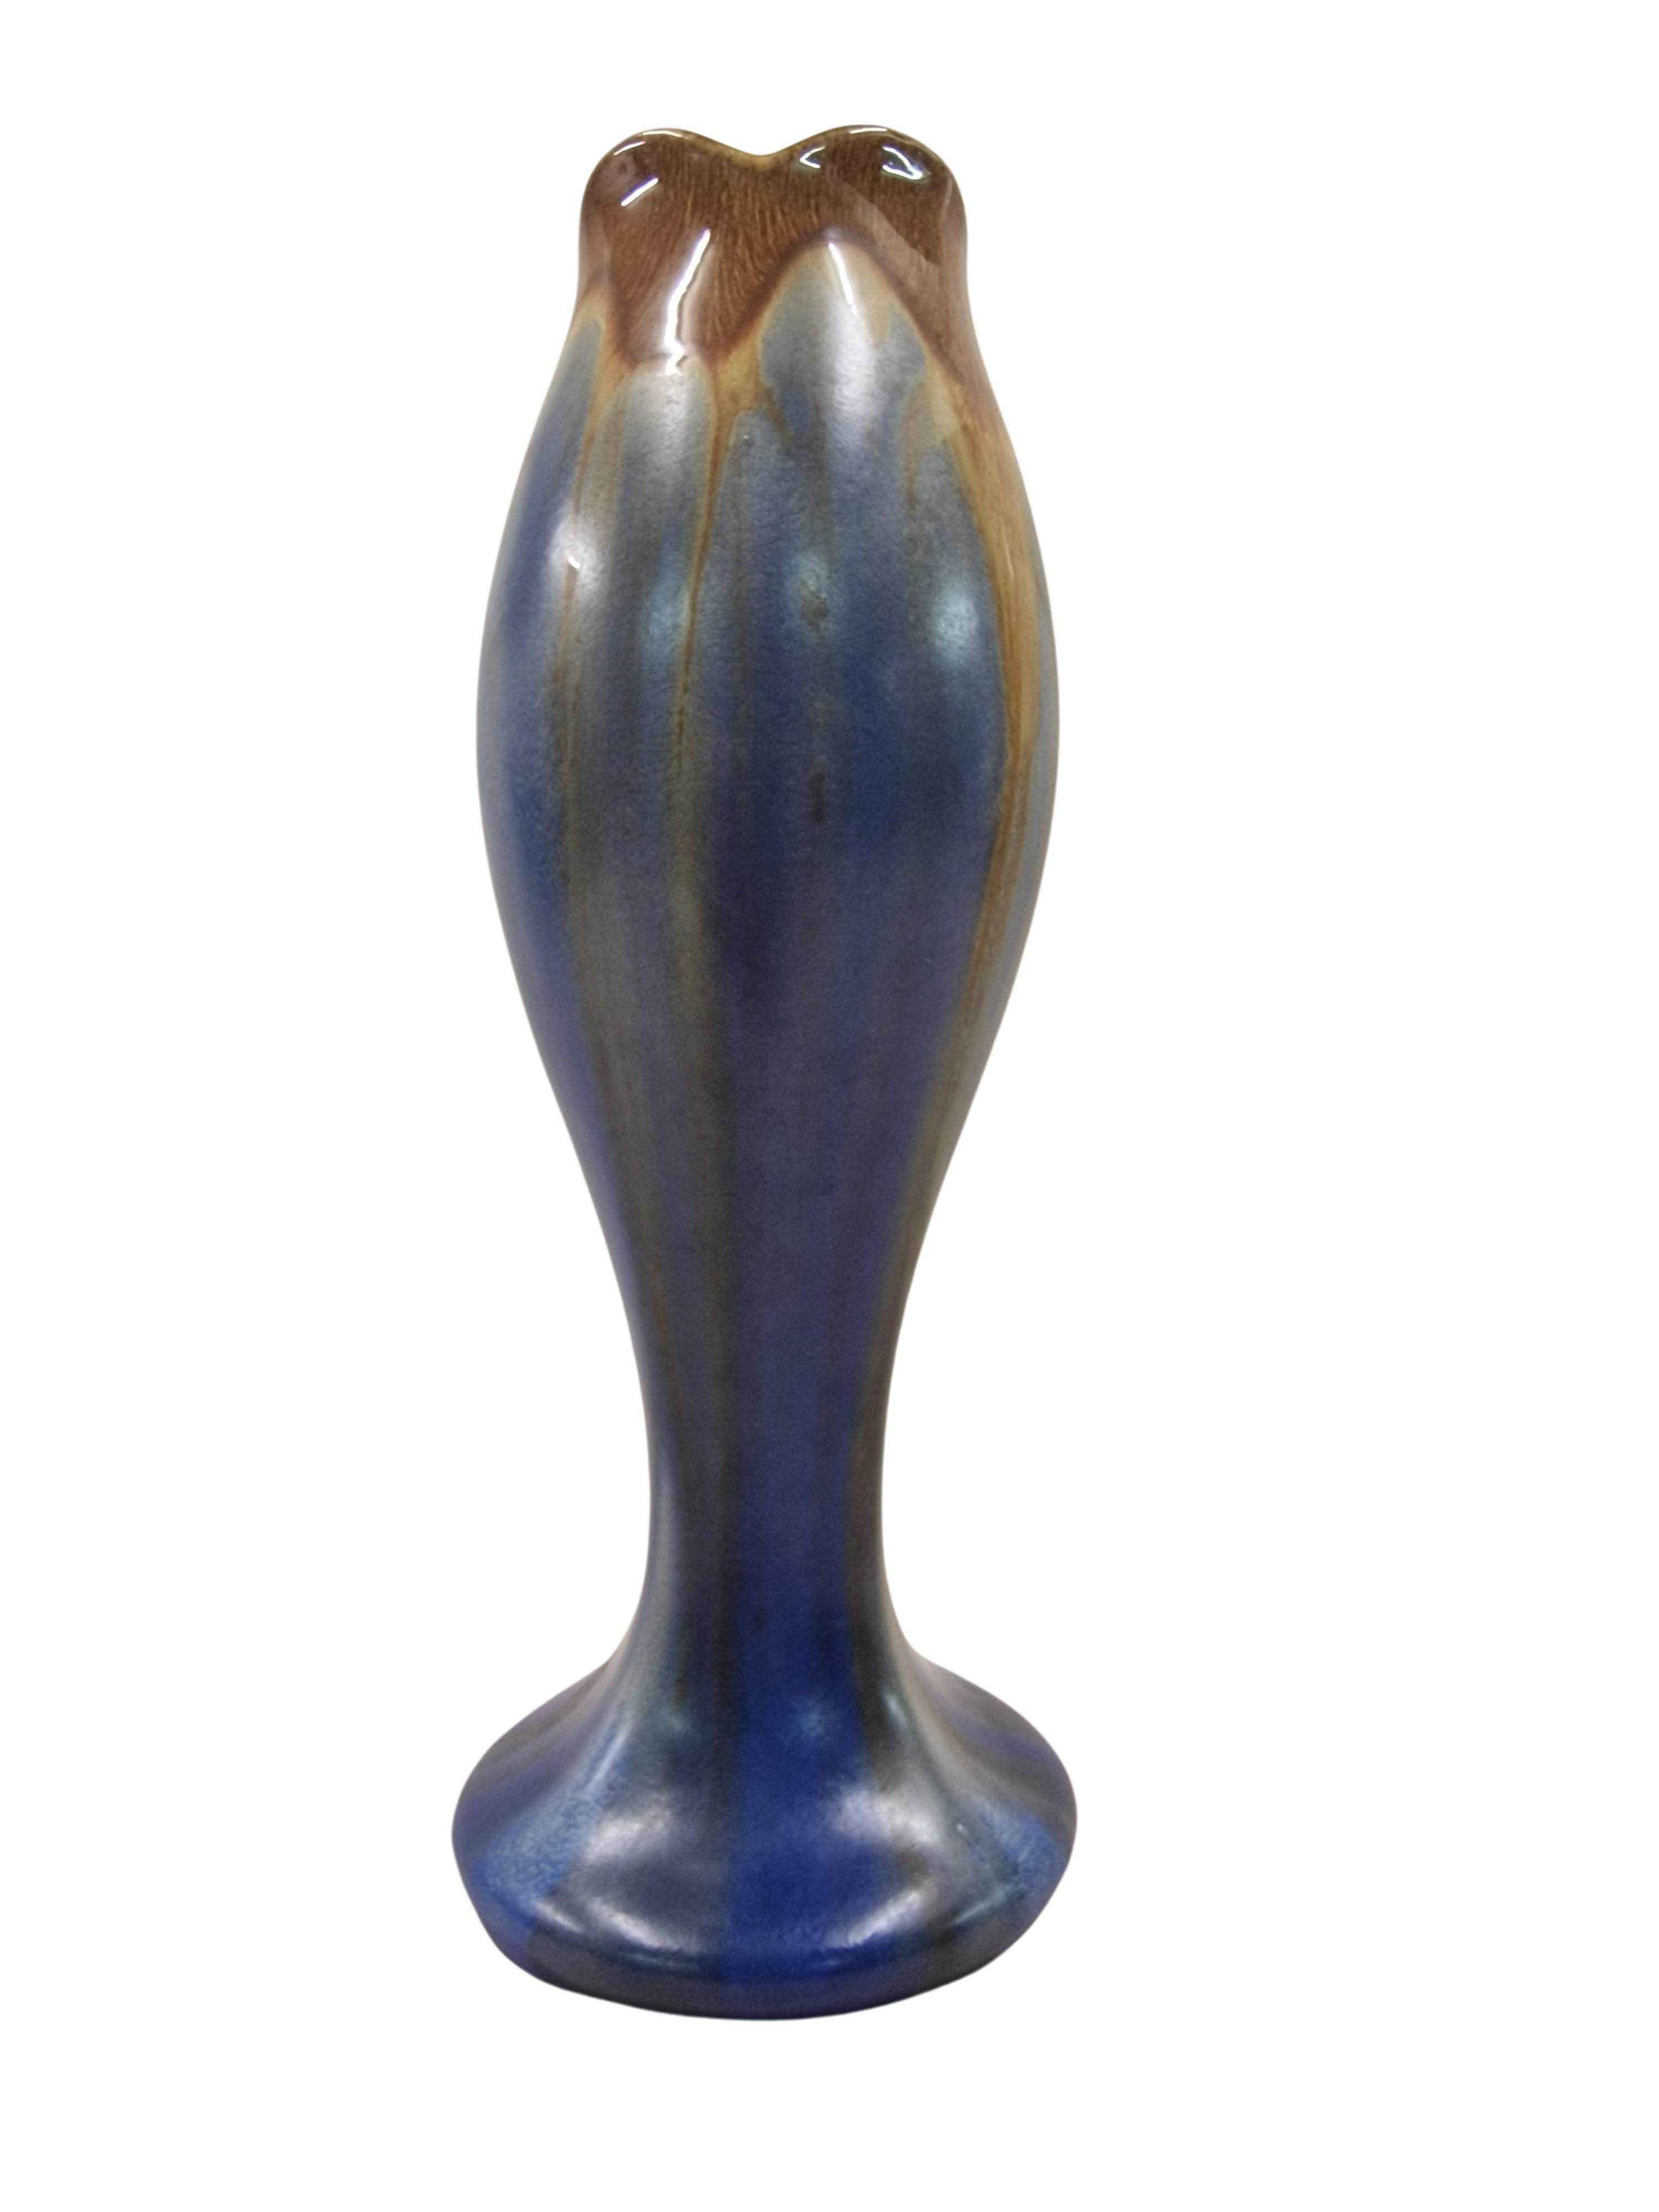 Stunning flower vase of the famous manufacturer Thulin from Belgium, made in the 1930s. 

The vase is elaborately designed in form as in colourfulness. The round base rises into a raised, bulbous shape, with curves in the upper outlet.

The vase has